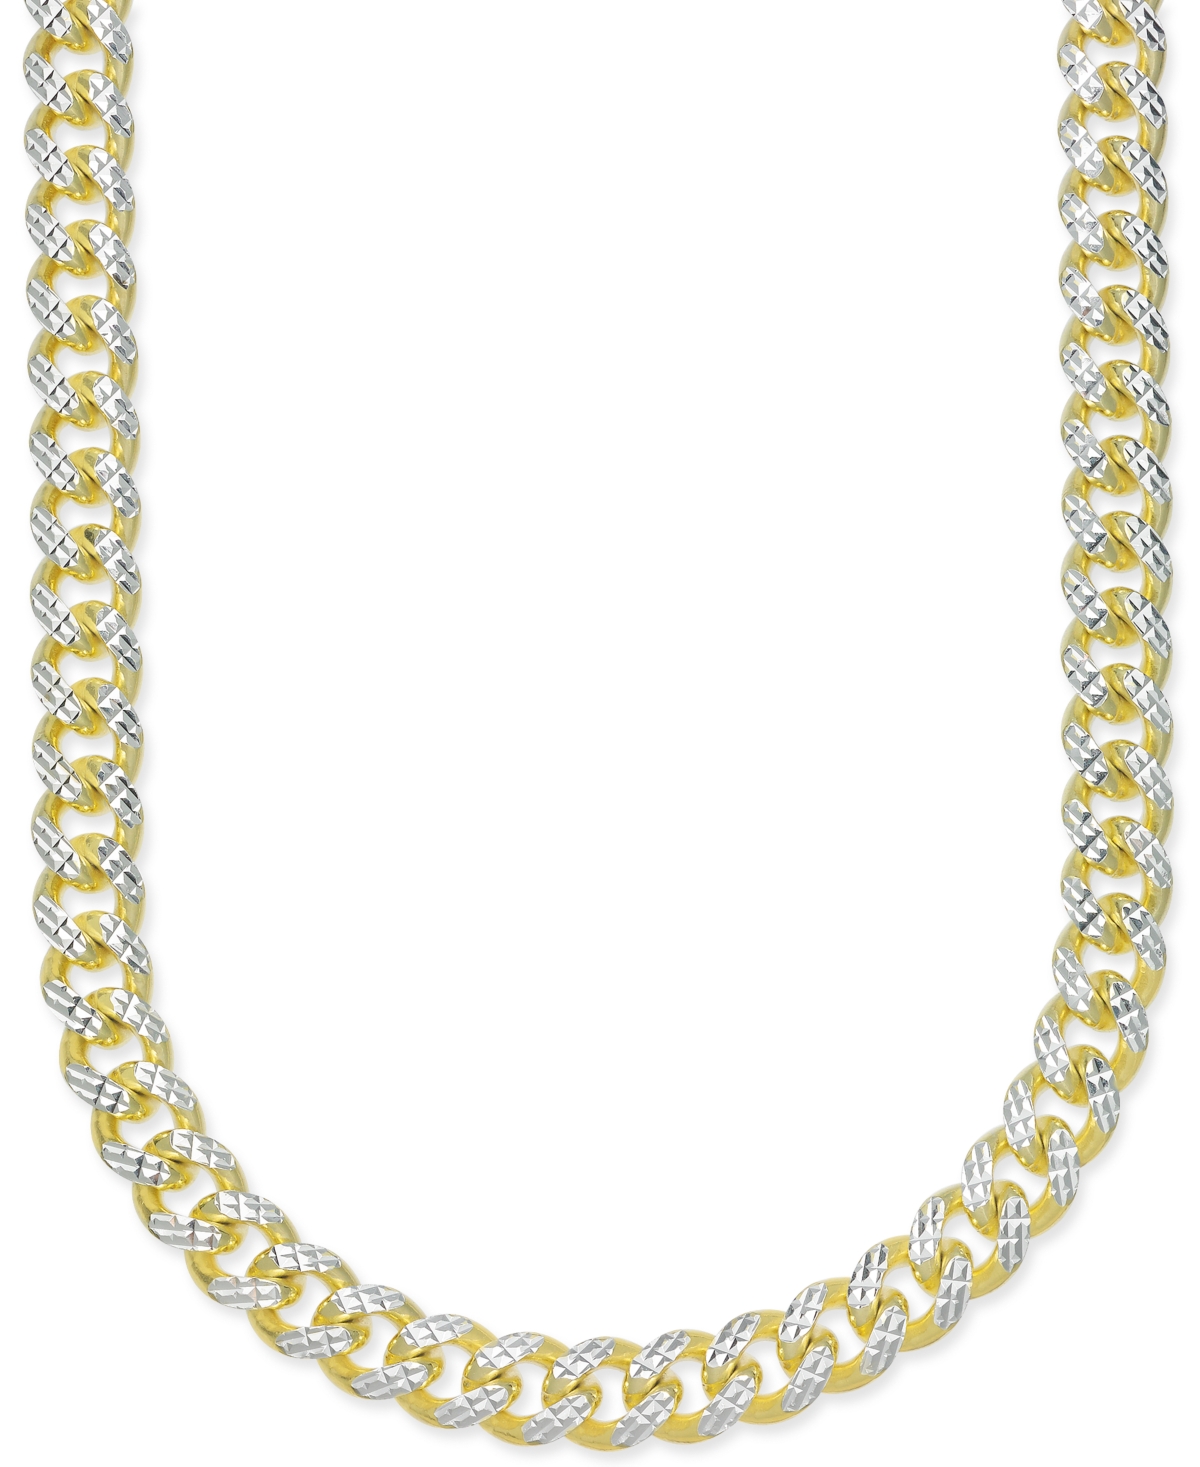 24" Men's Two-Tone Cuban Link Chain Necklace in 14k Gold-Plated Sterling Silver and Sterling Silver - Two-Tone